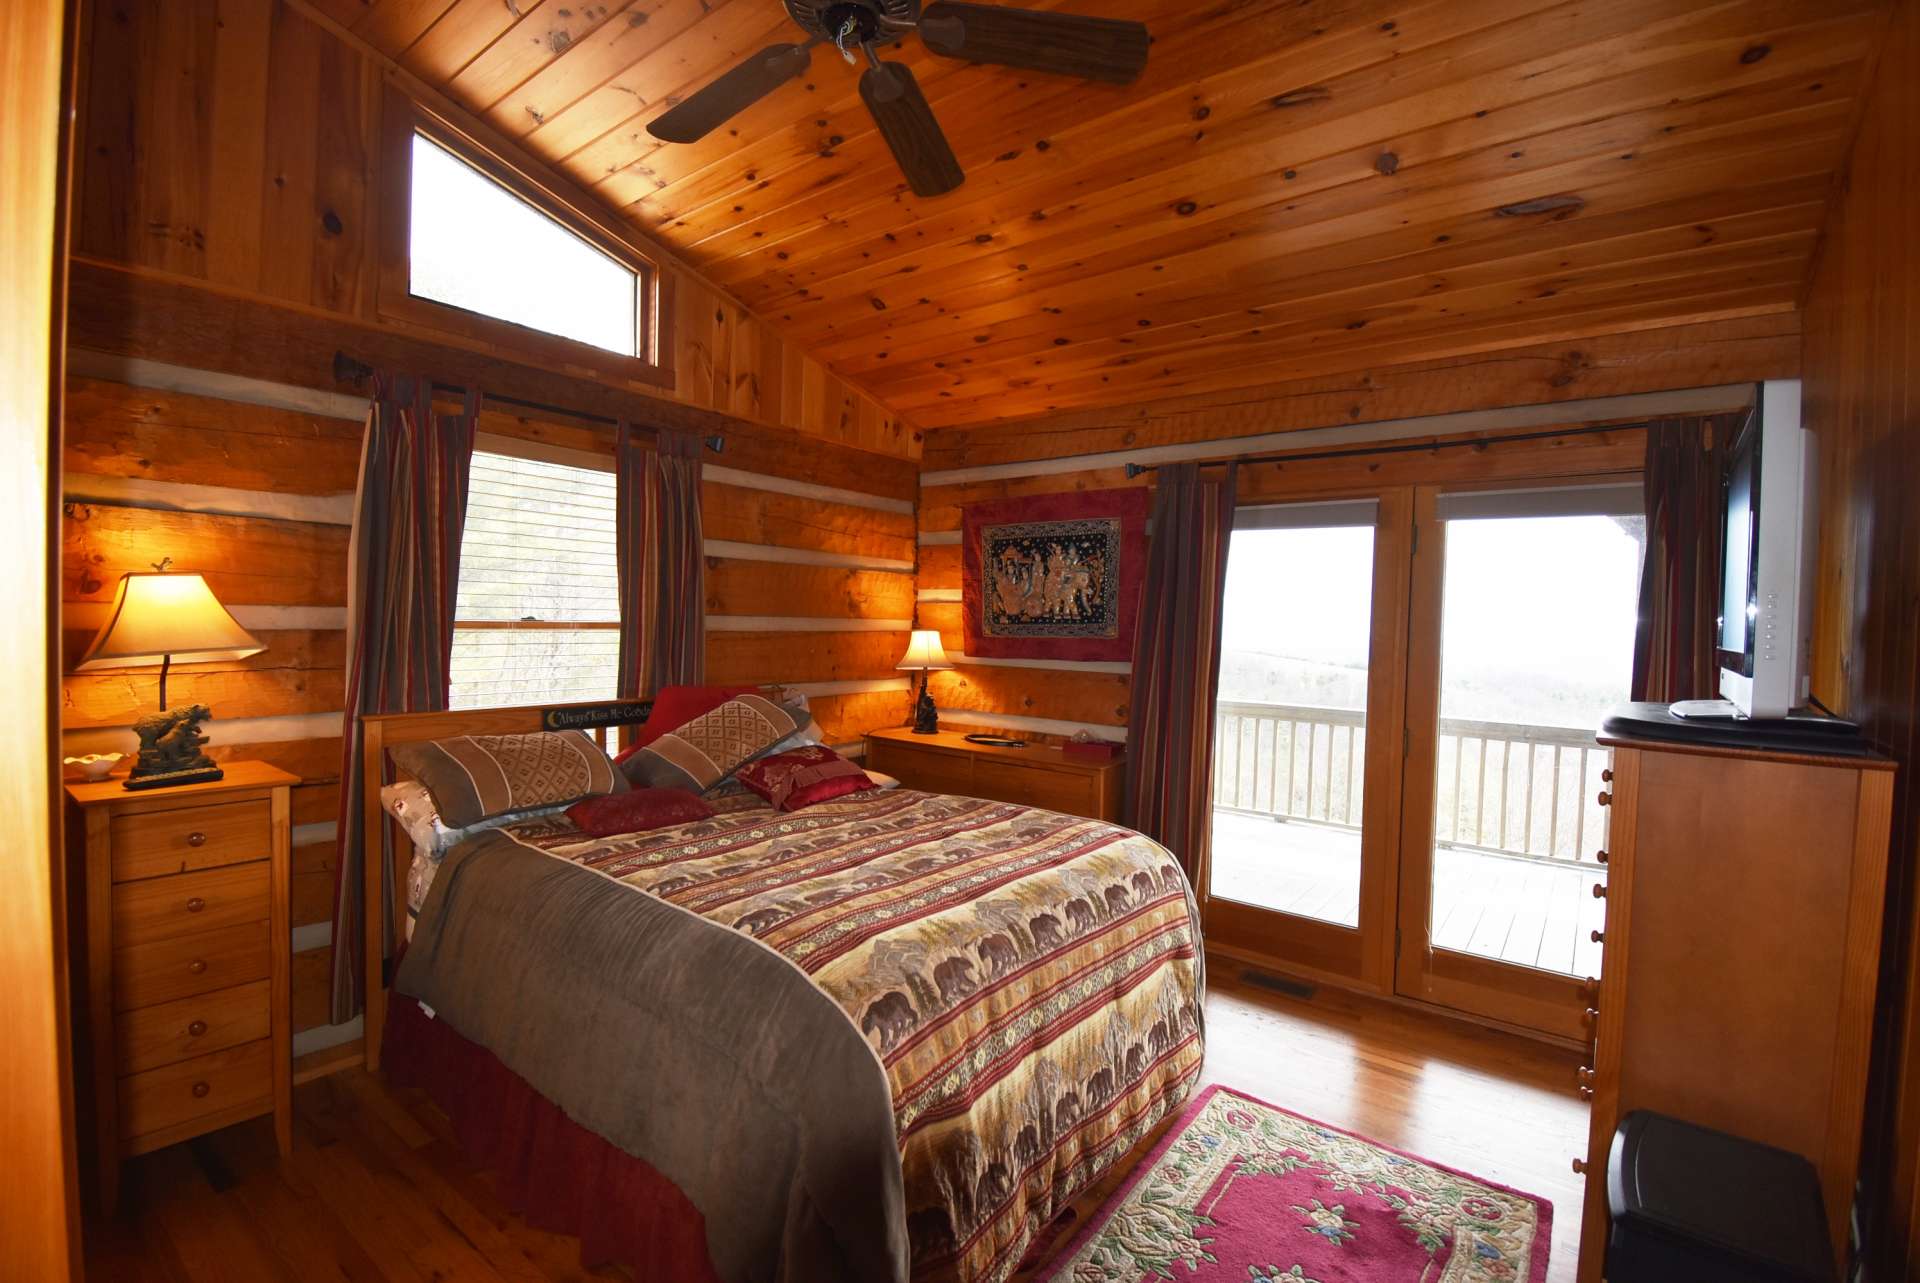 The main level master suite is spacious with vaulted ceiling, private bath, and access to the back deck.